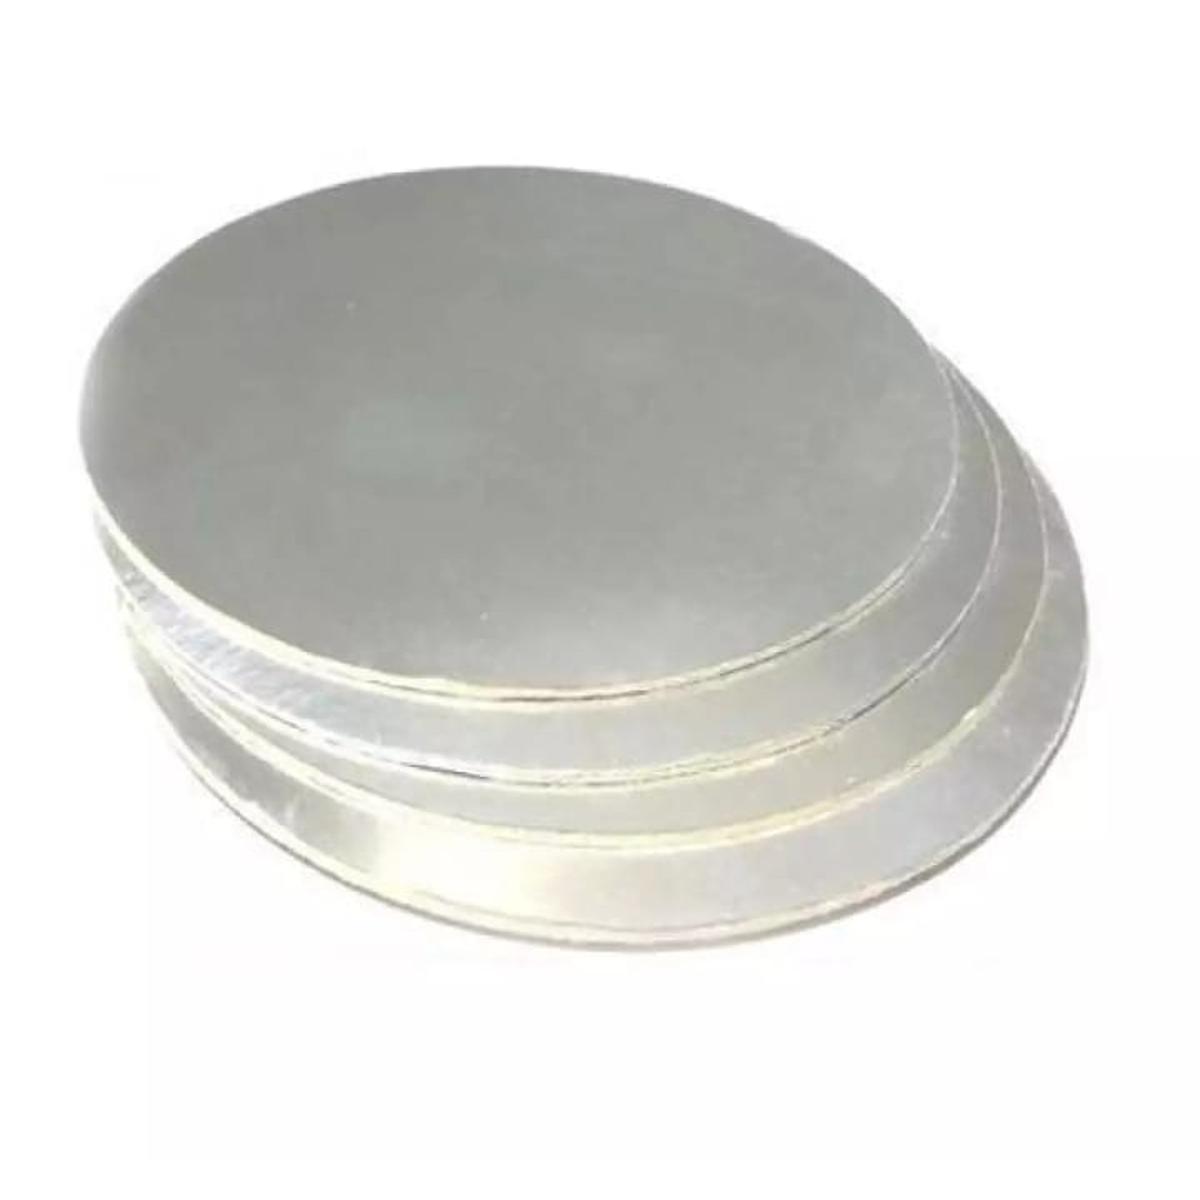 14x14 Inch Drum Cake Base Board - Manufacturer Exporter Supplier from  Kanpur India